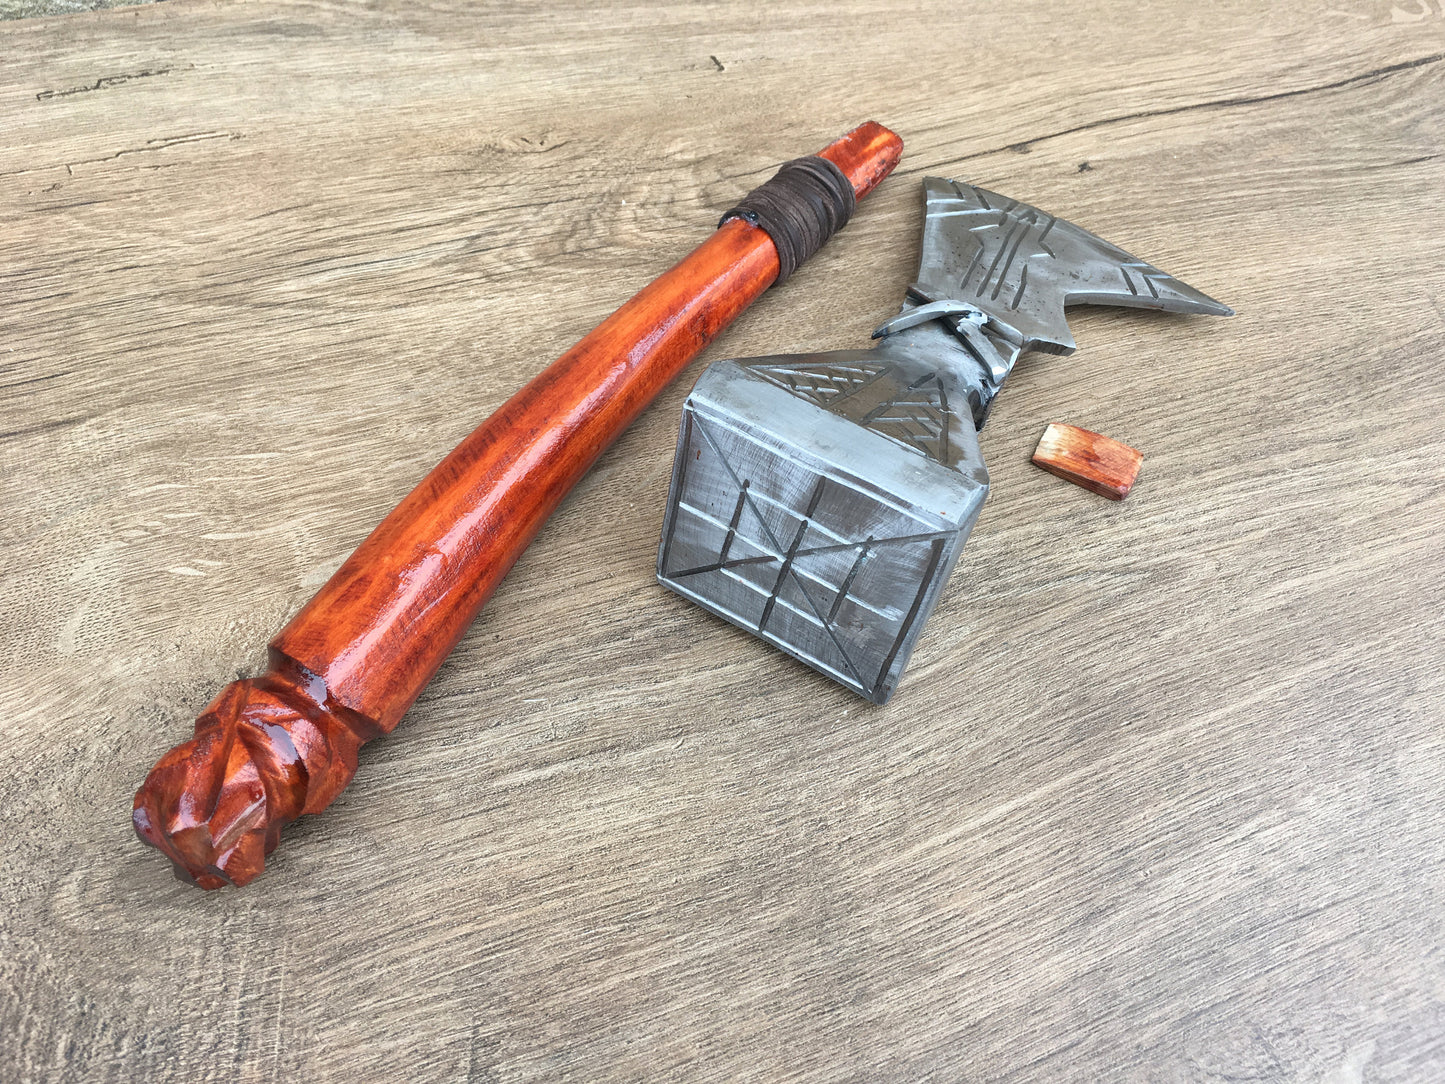 Storm Breaker, Thor, stormbreaker, viking axe, Mjolnir, cosplay, axe cosplay, costume weapon, axes,cosplay weapon